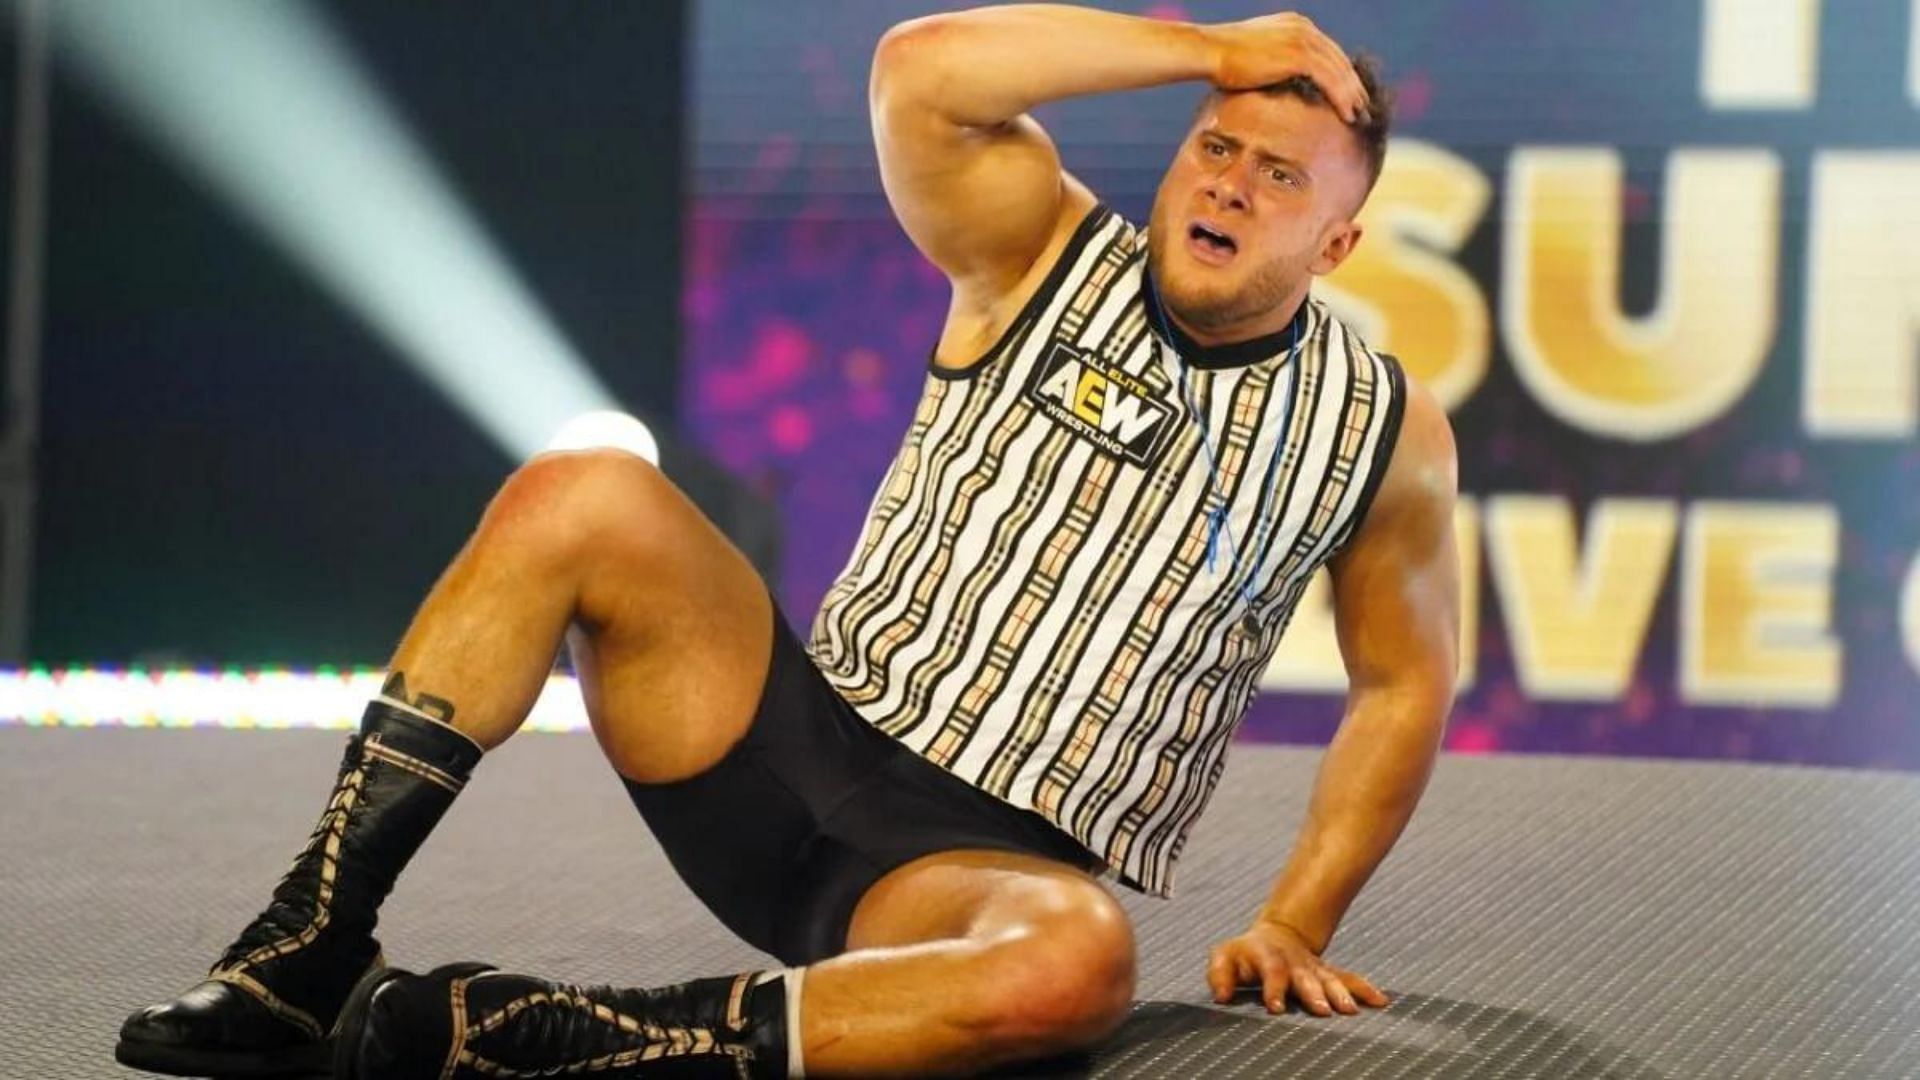 AEW Champion MJF is a very eccentric character